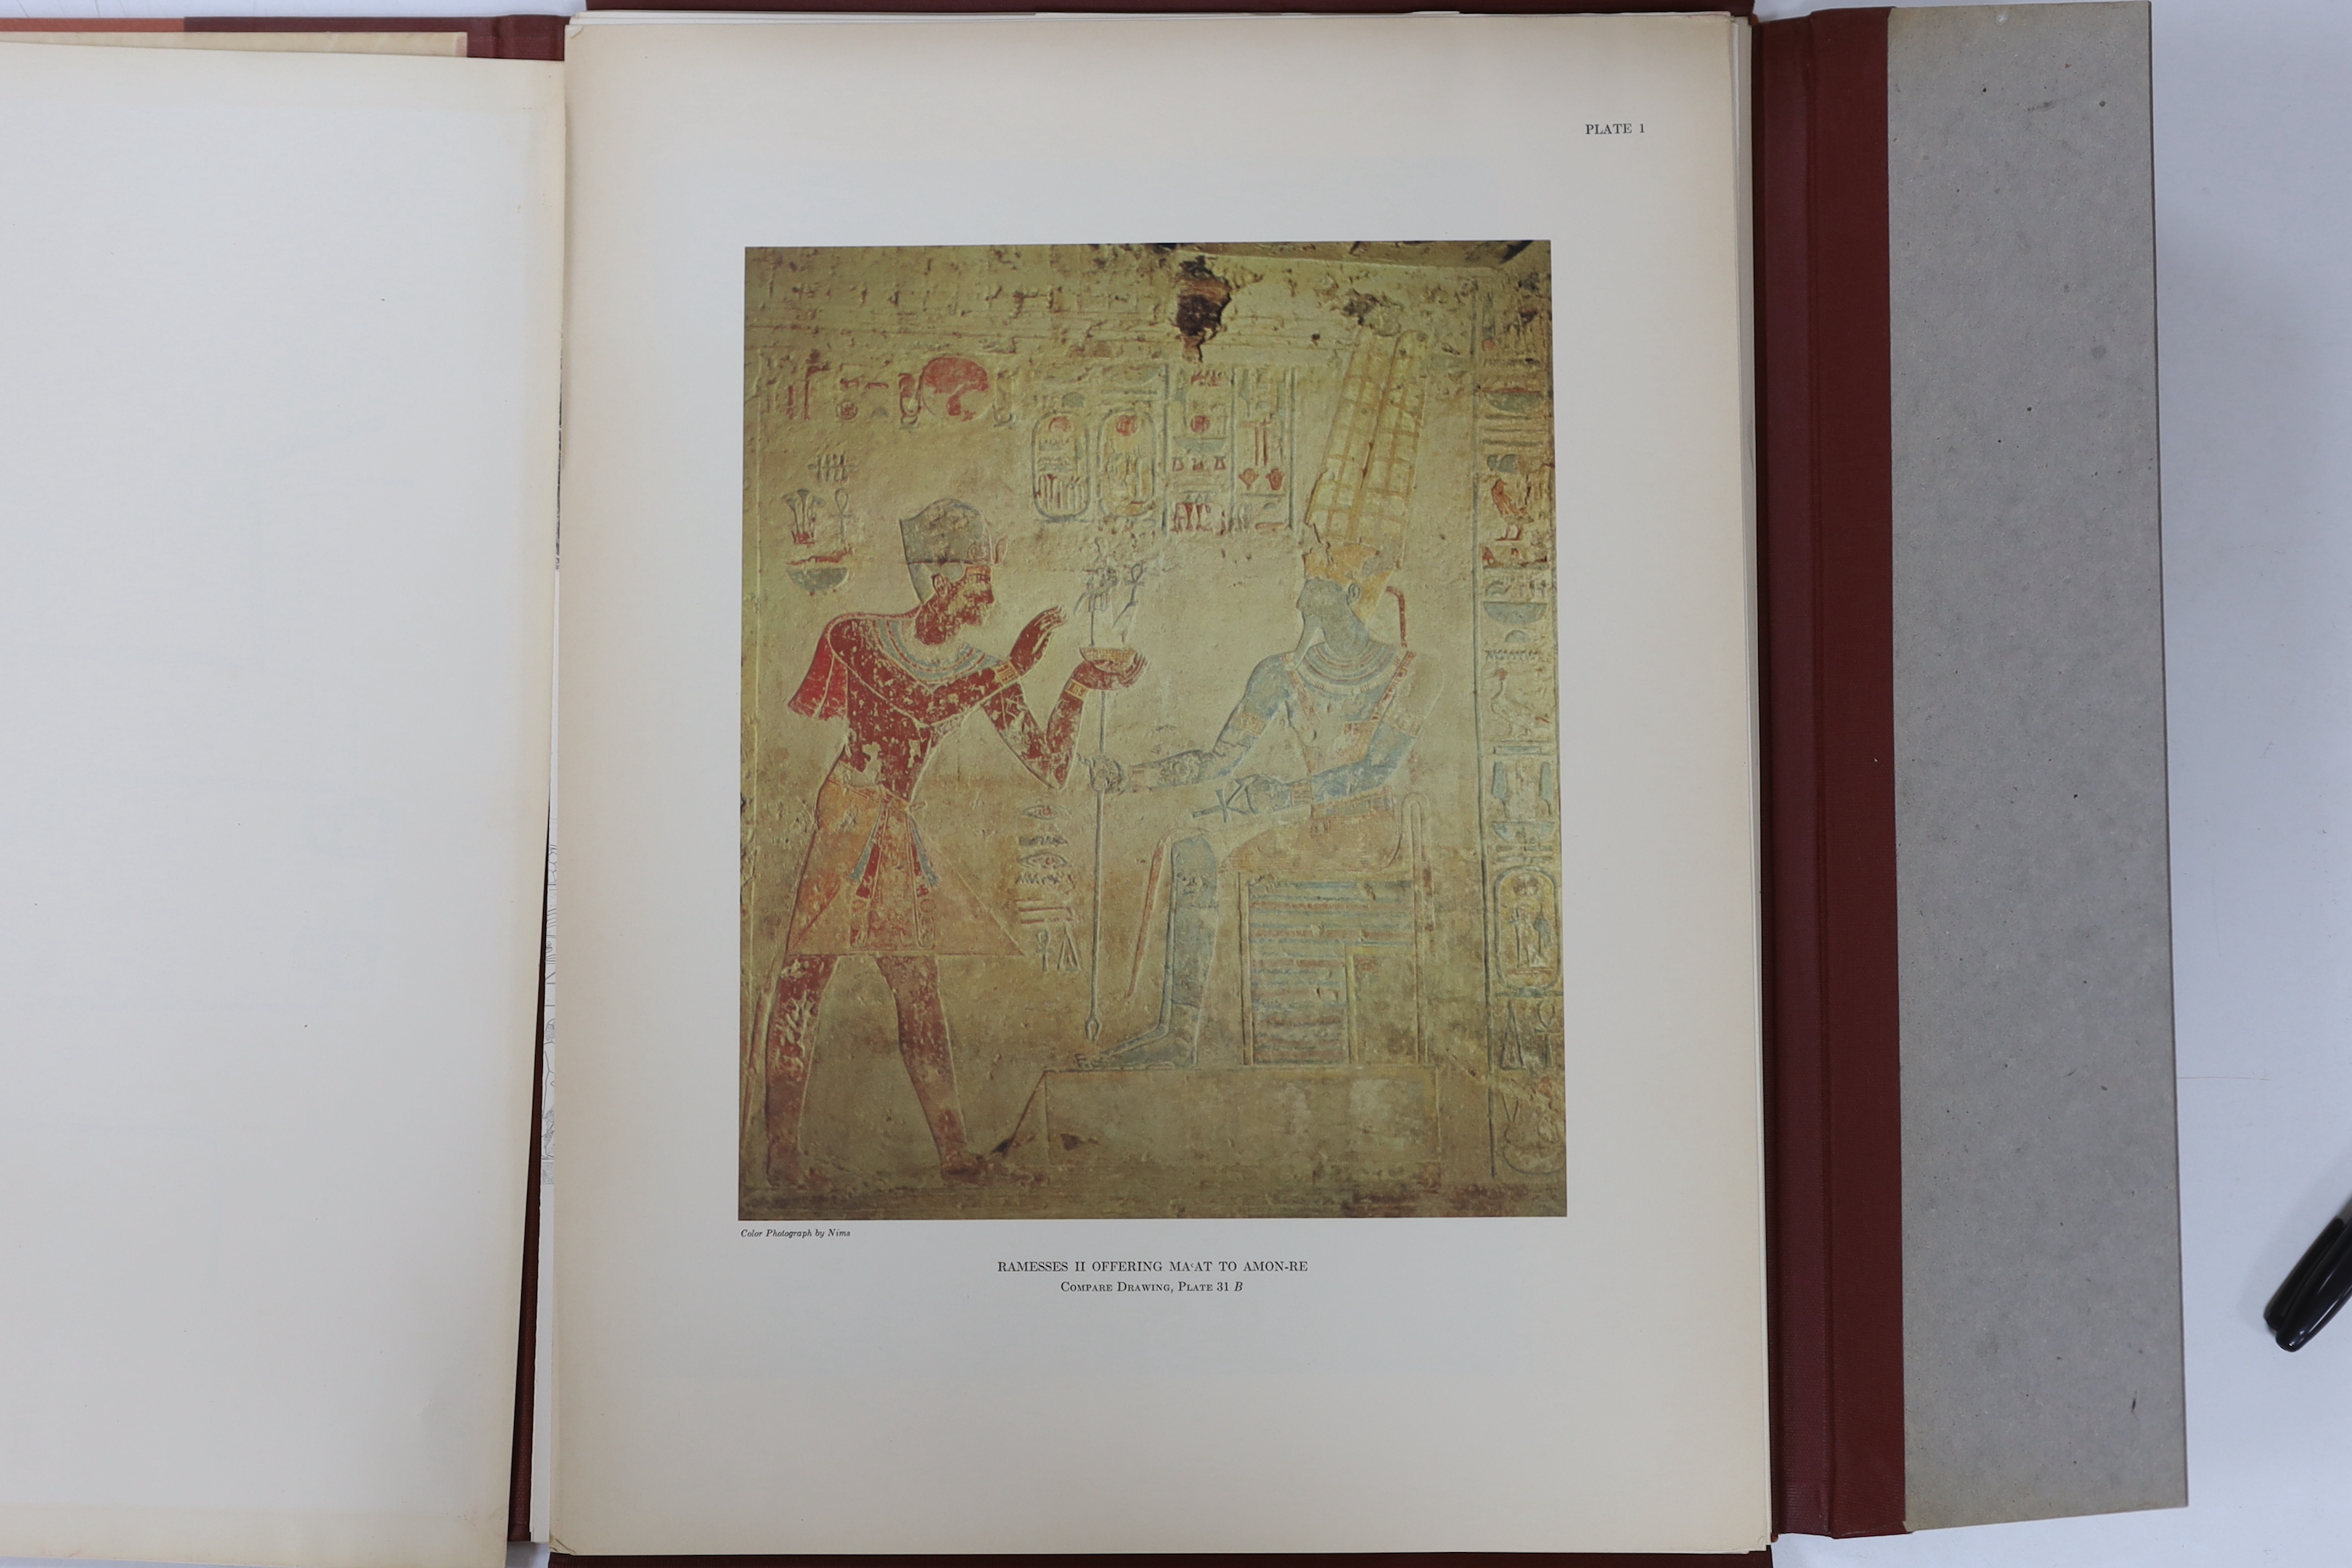 The Beit-Wali Temple of Ramses II by Herbert Ricke & George R Hughes, portfolio book with plates, publ. 1967 The University of Chicago Press, first edition